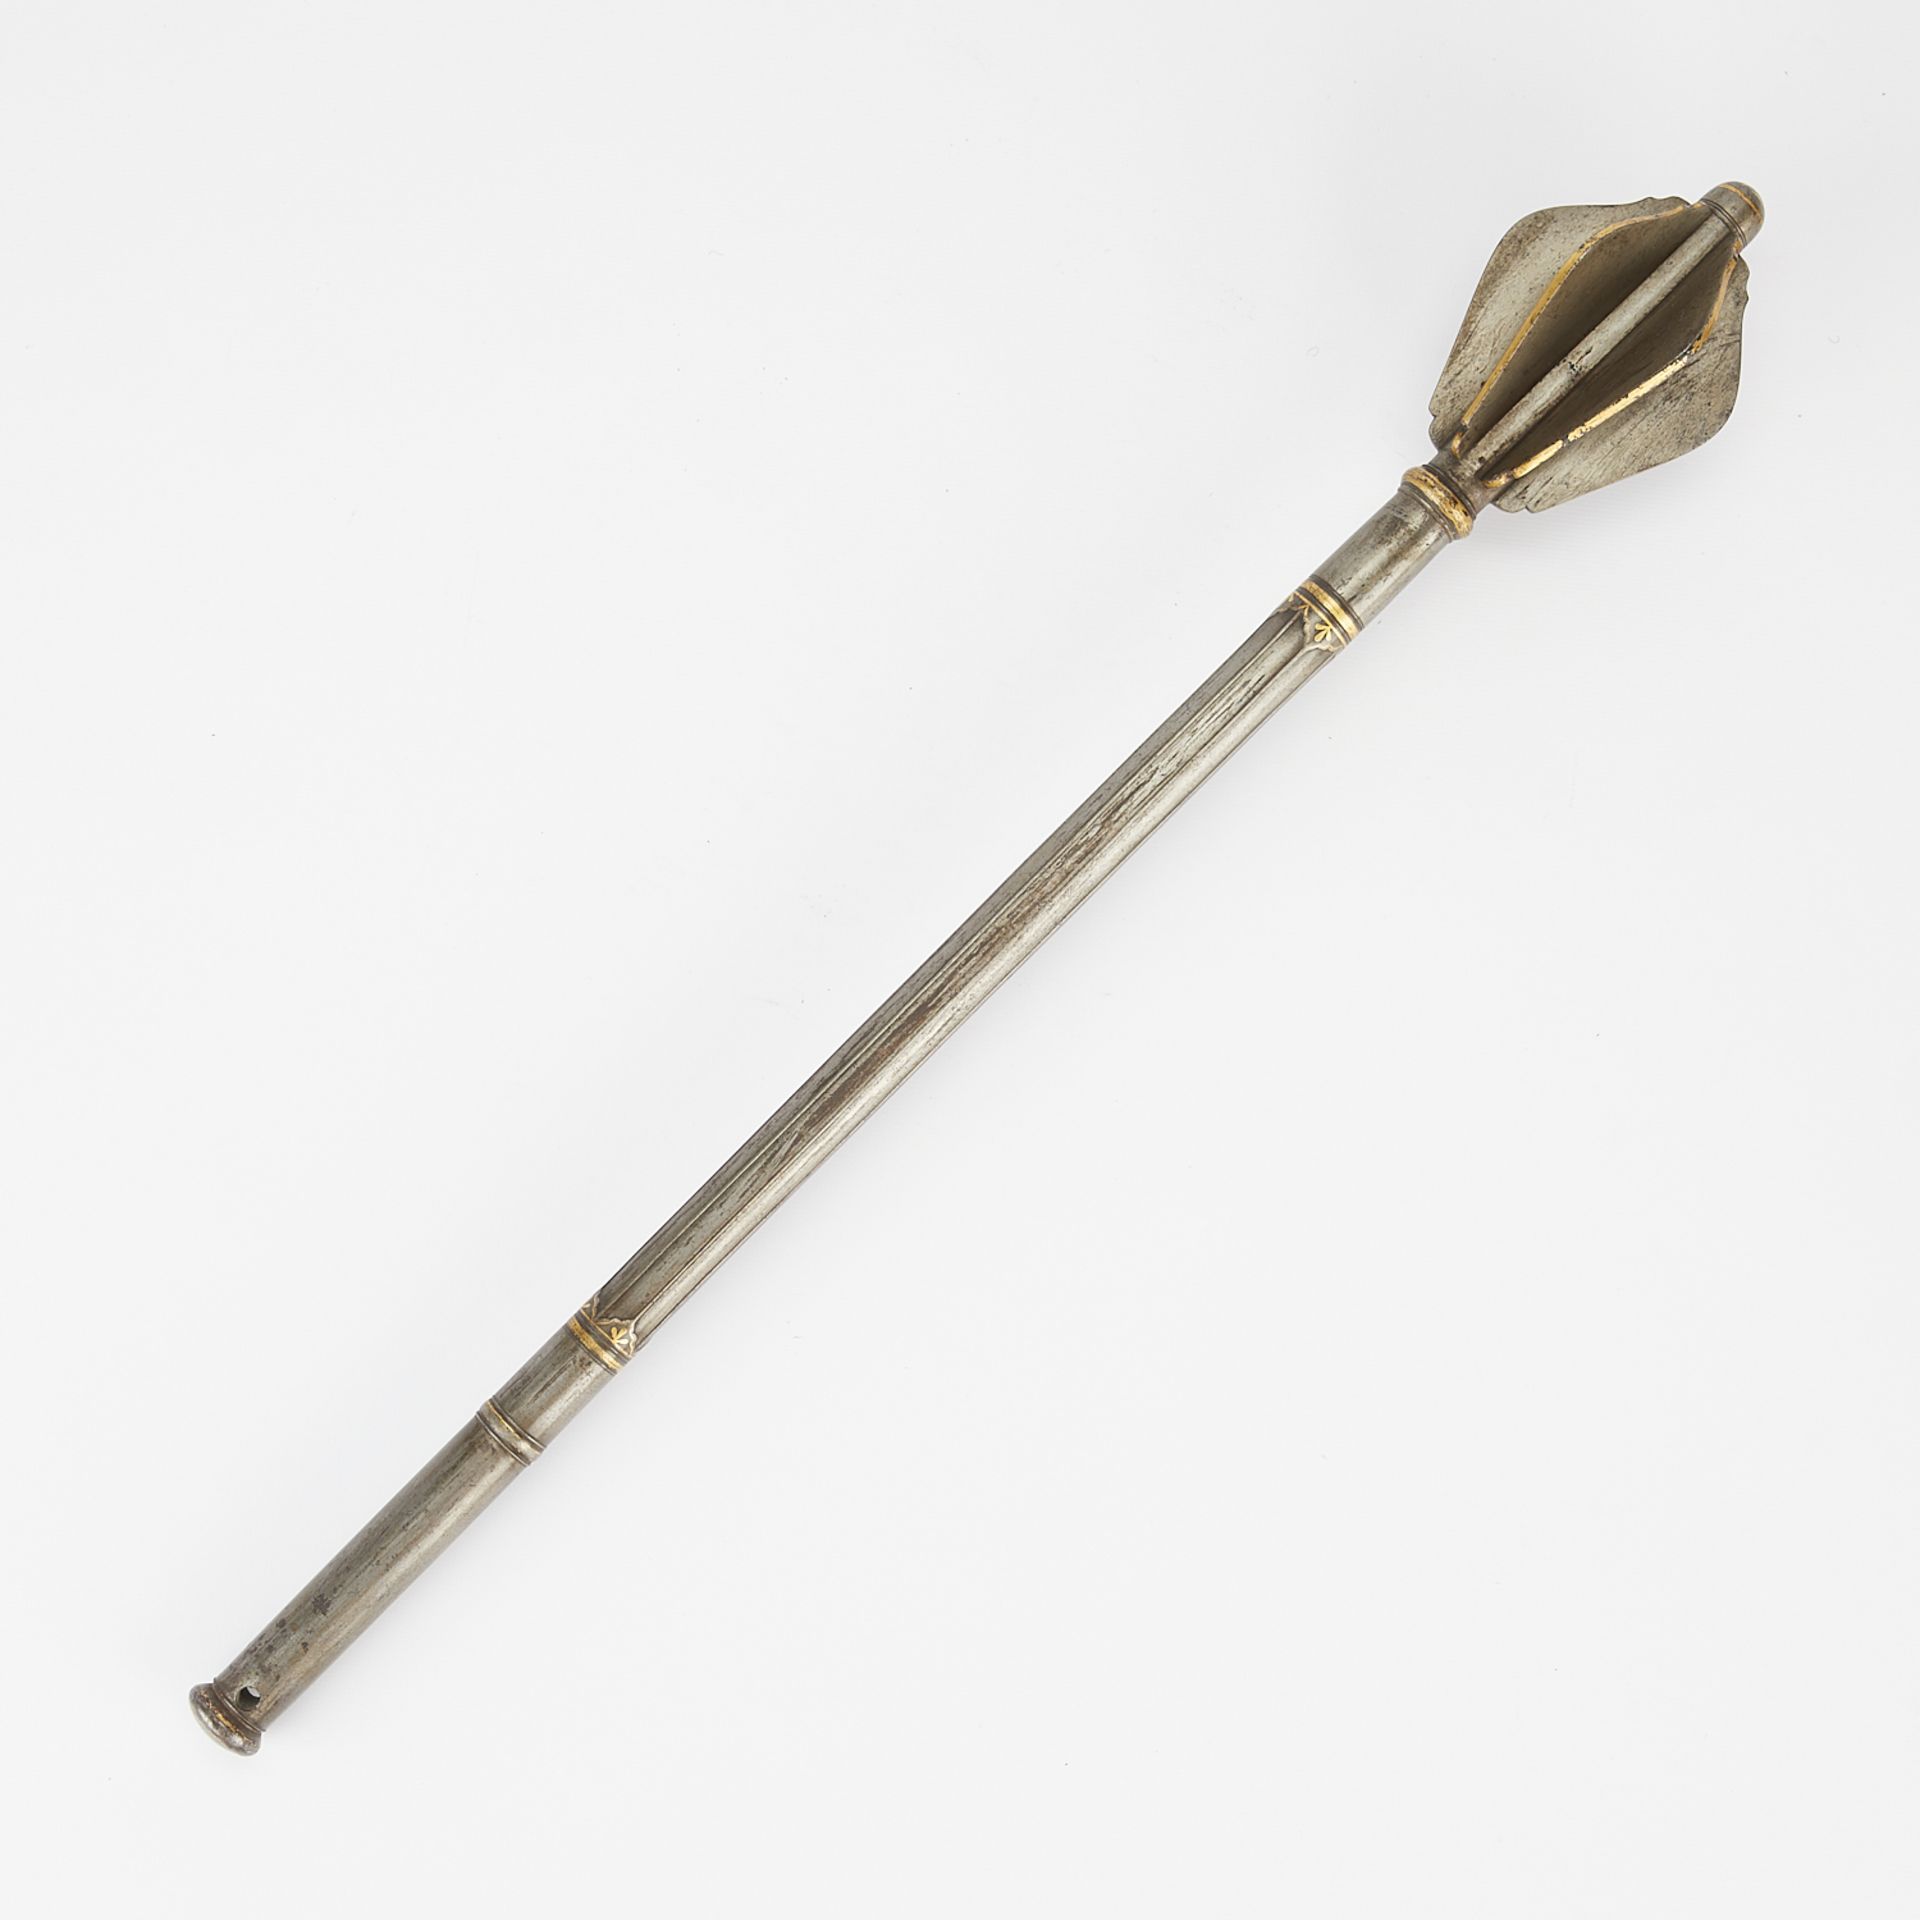 17th/18th c. Ottoman Gold Damscened Flanged Mace - Image 3 of 7